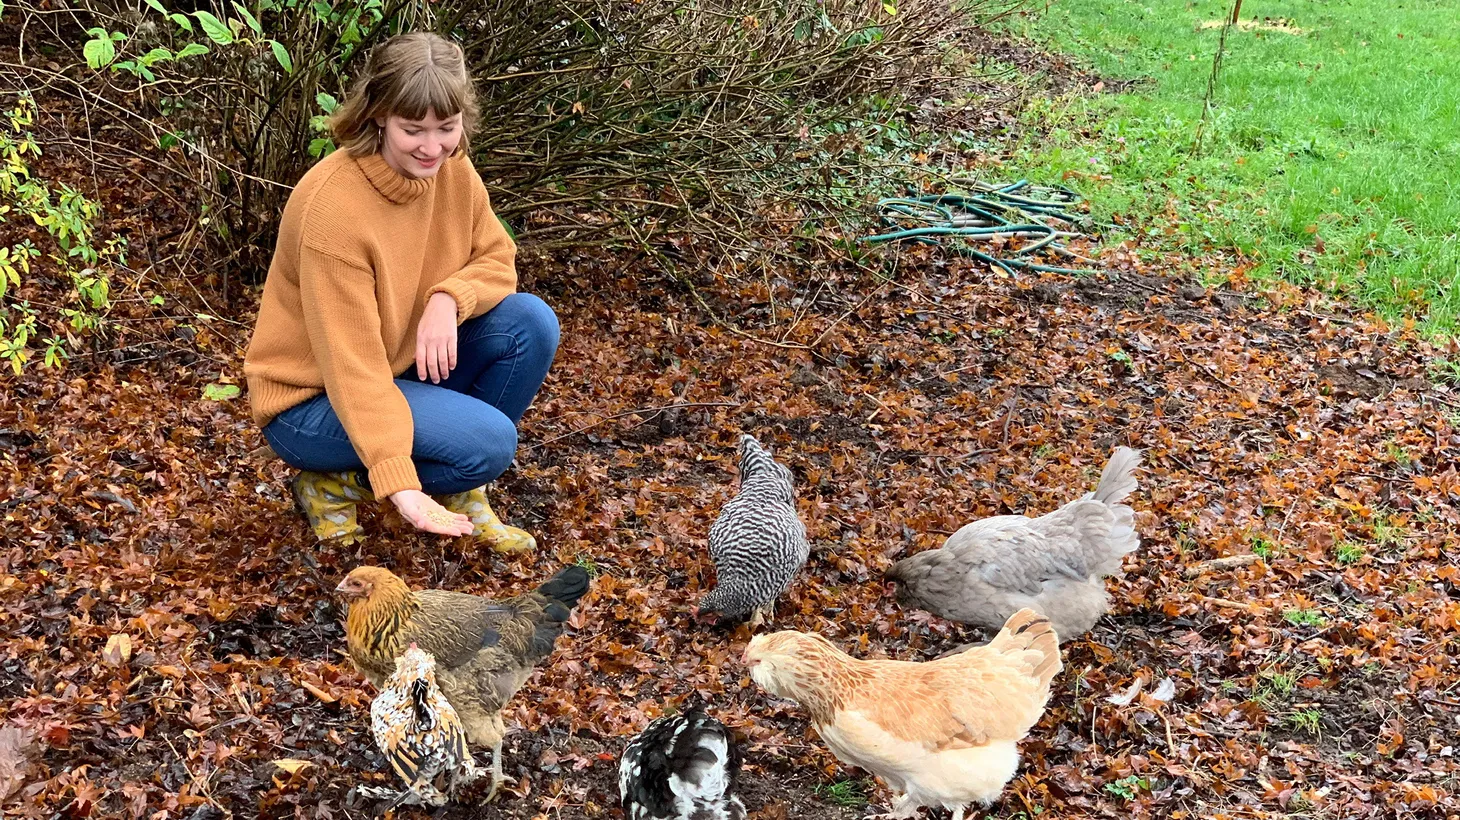 Raising chickens runs in Tove Danovich’s family, whose great-grandmother was gifted a coop by her husband as a wedding gift.